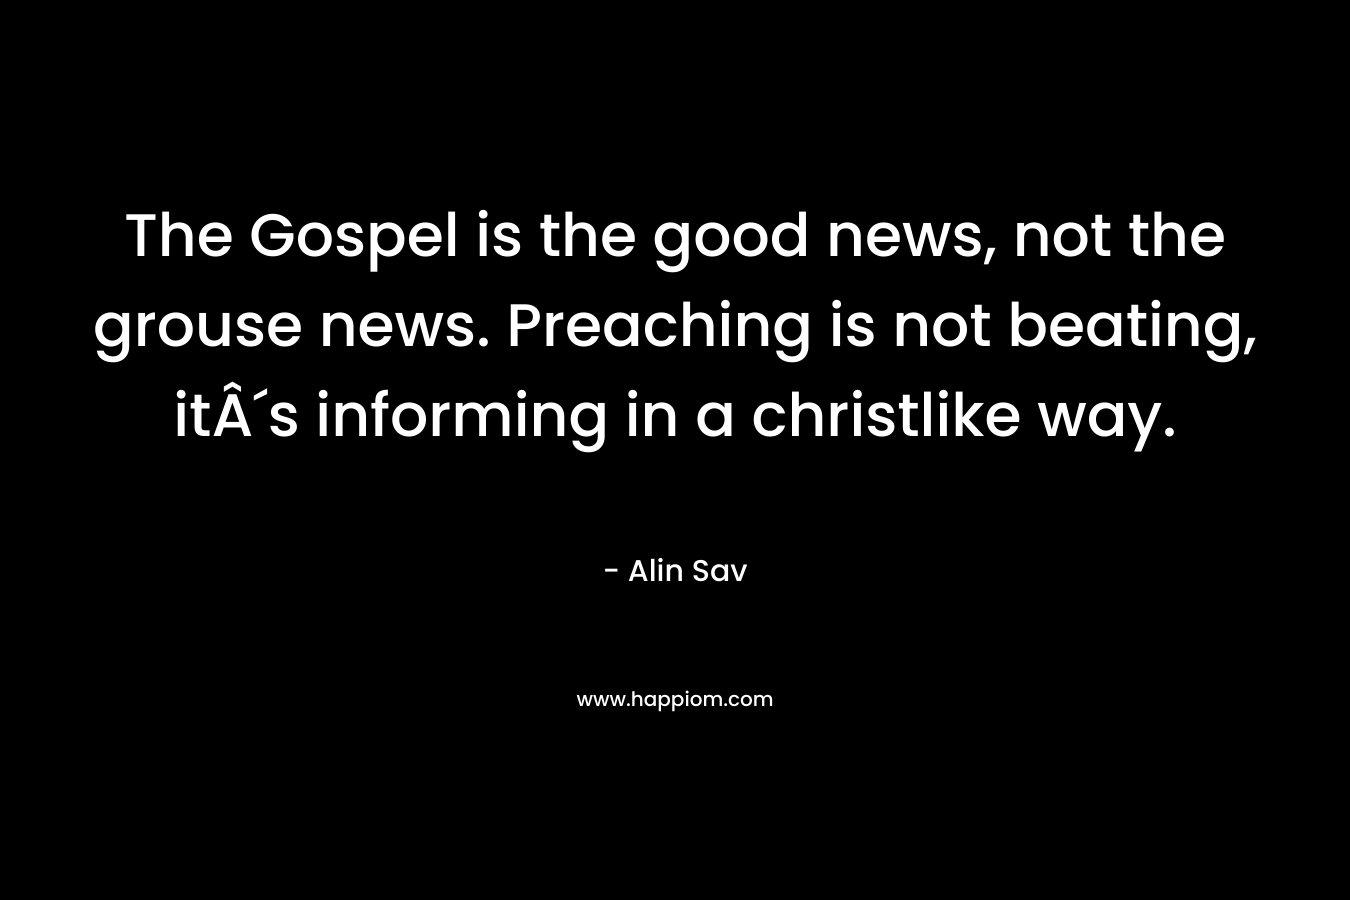 The Gospel is the good news, not the grouse news. Preaching is not beating, itÂ´s informing in a christlike way.